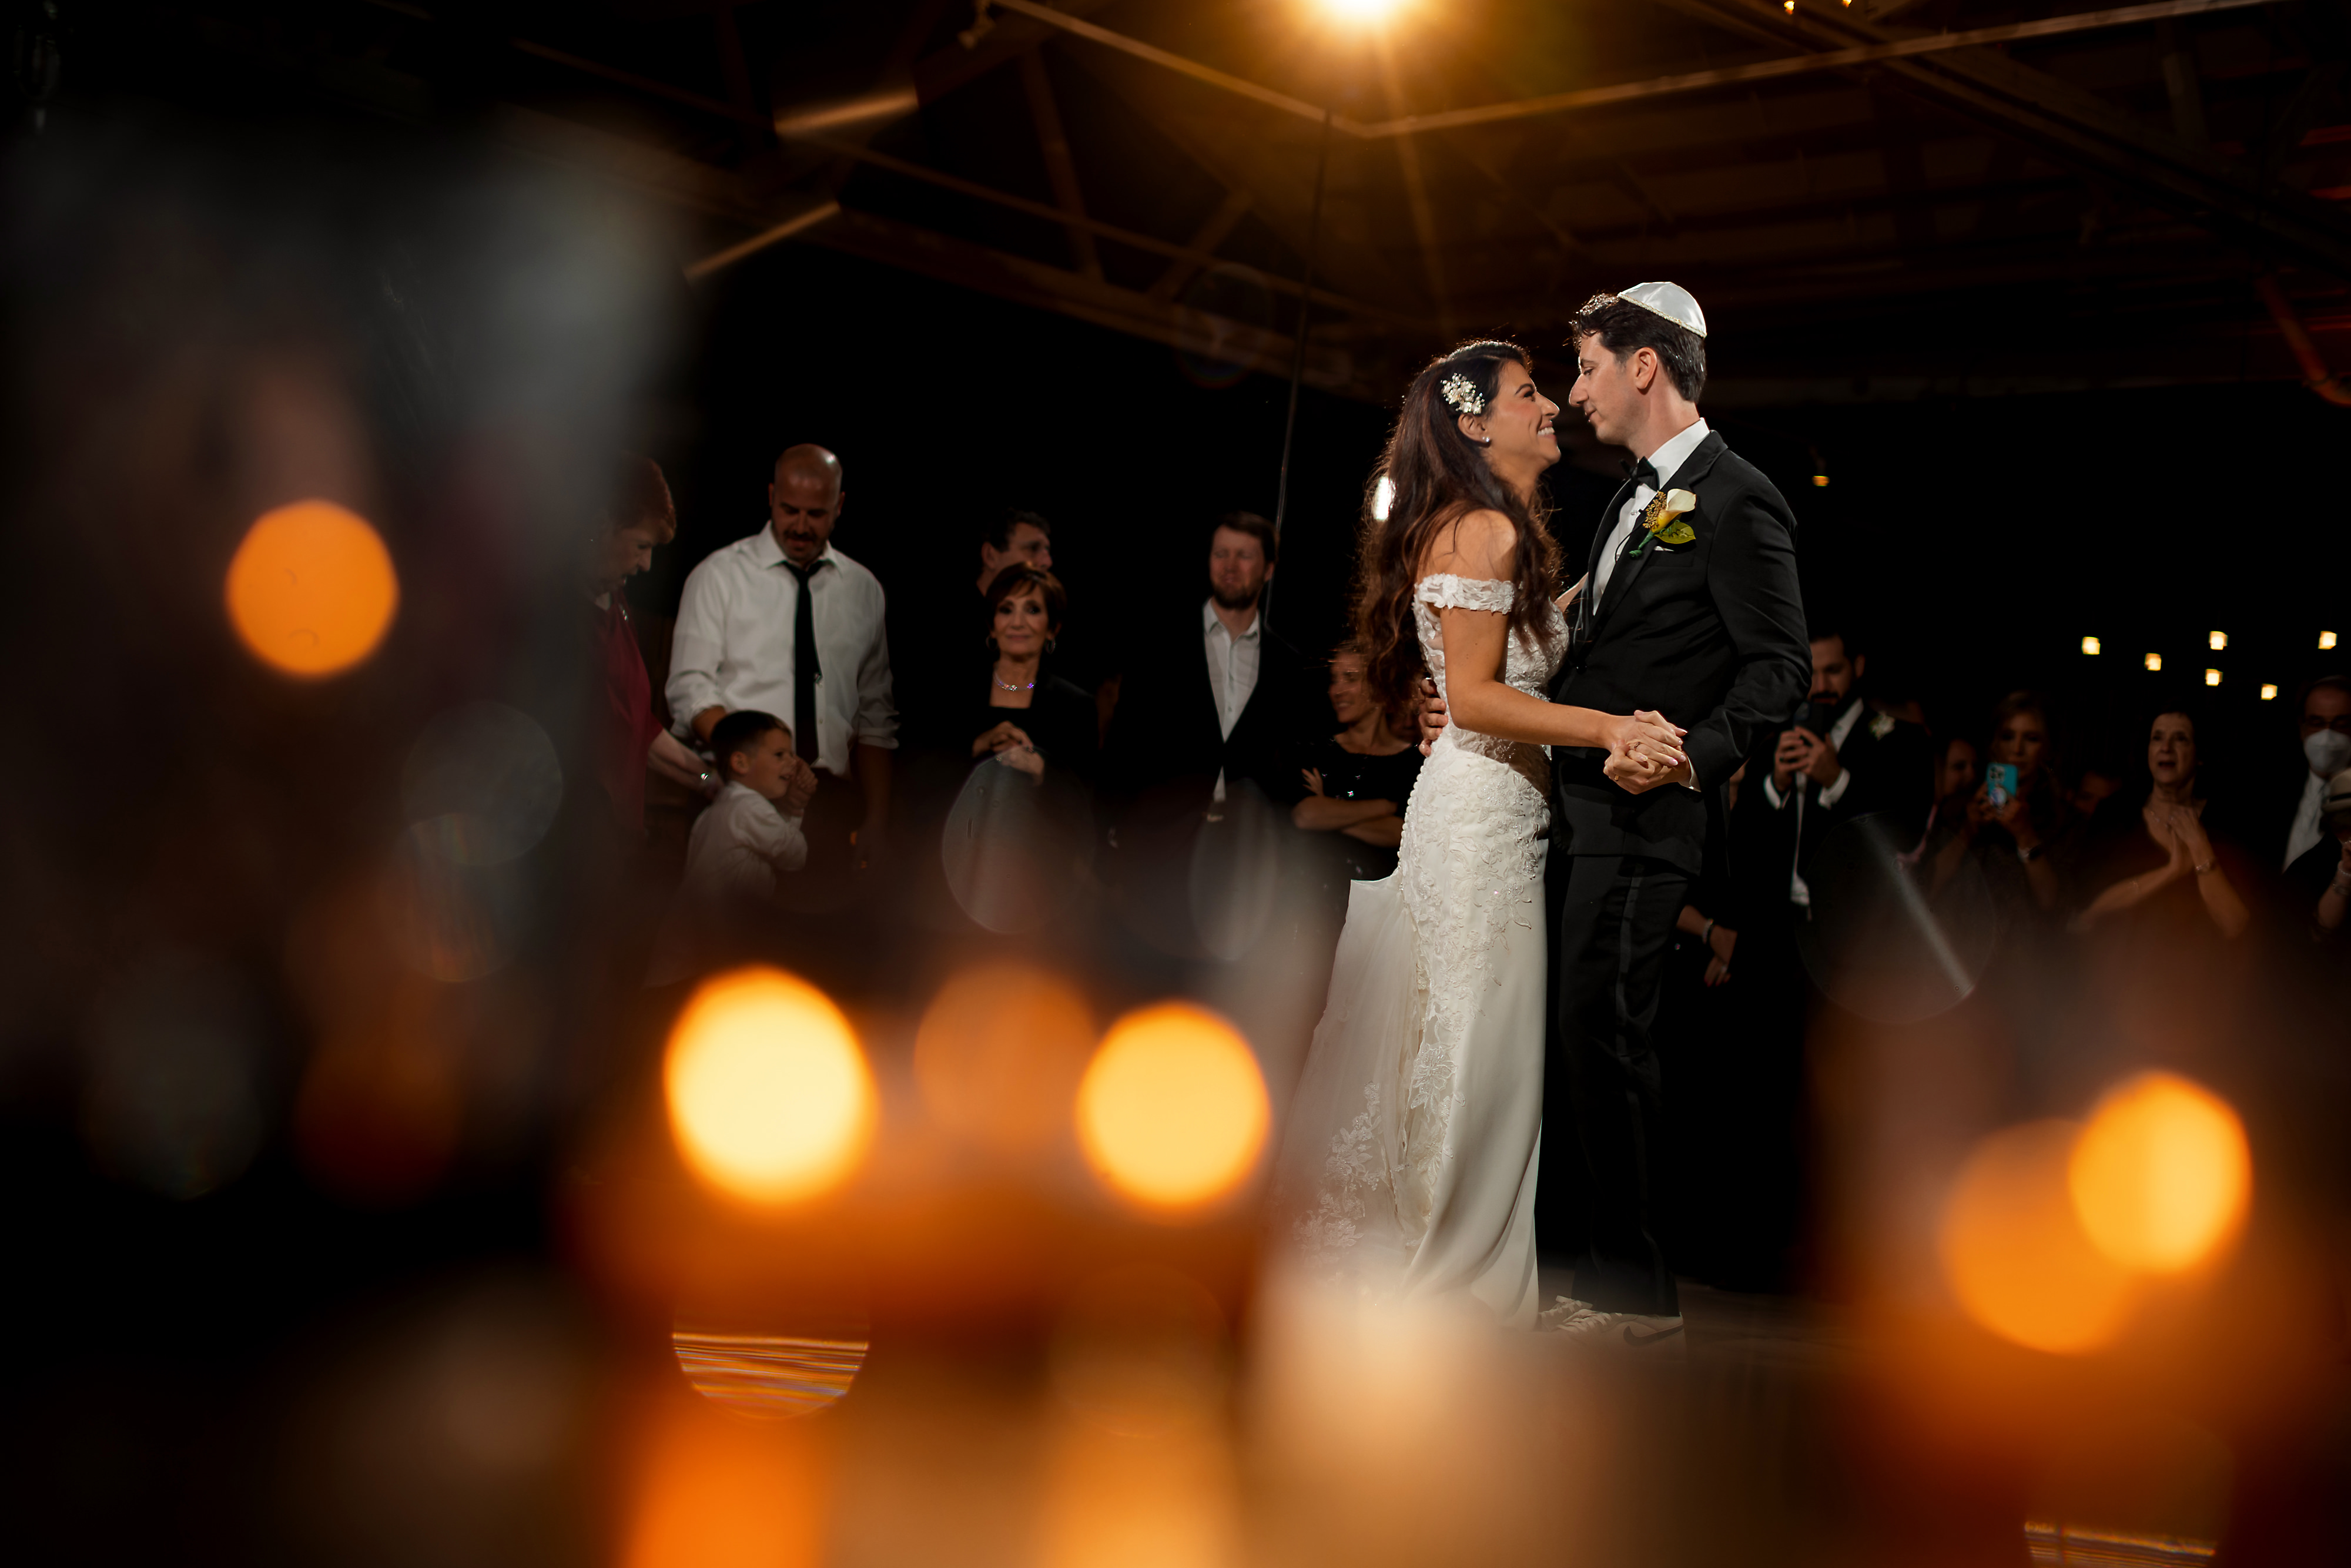 Couple first dance during wedding reception at Sarabande in Chicago